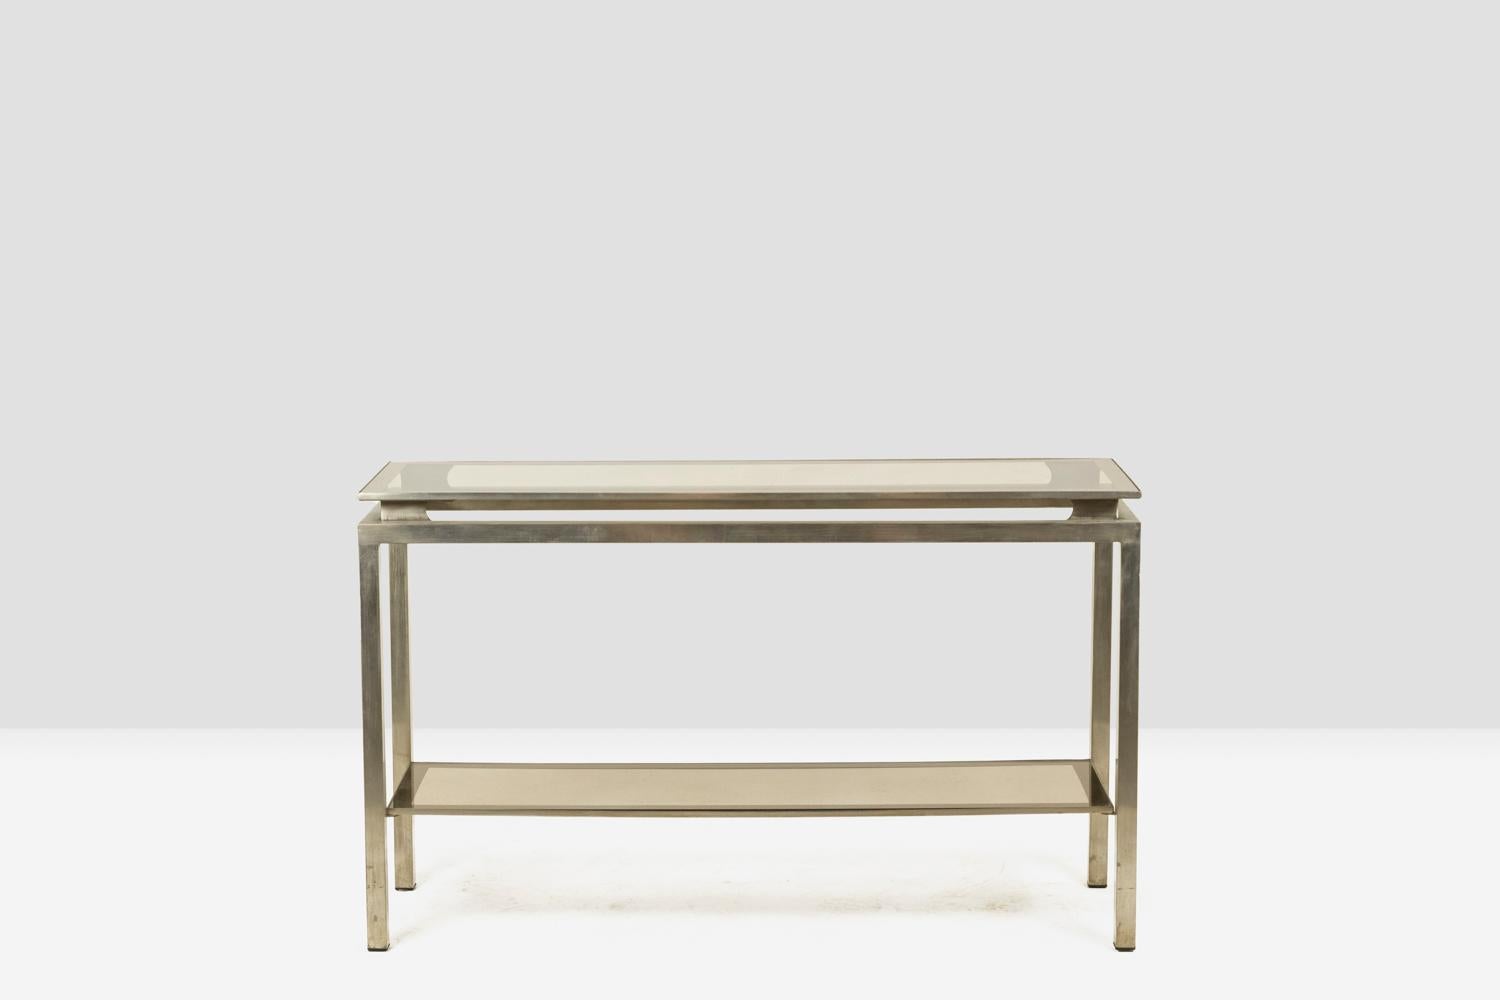 Maison Jansen, by.

Console in brushed metal with two smoked glass shelves, rectangular in shape.

French work realized in the 1970s.